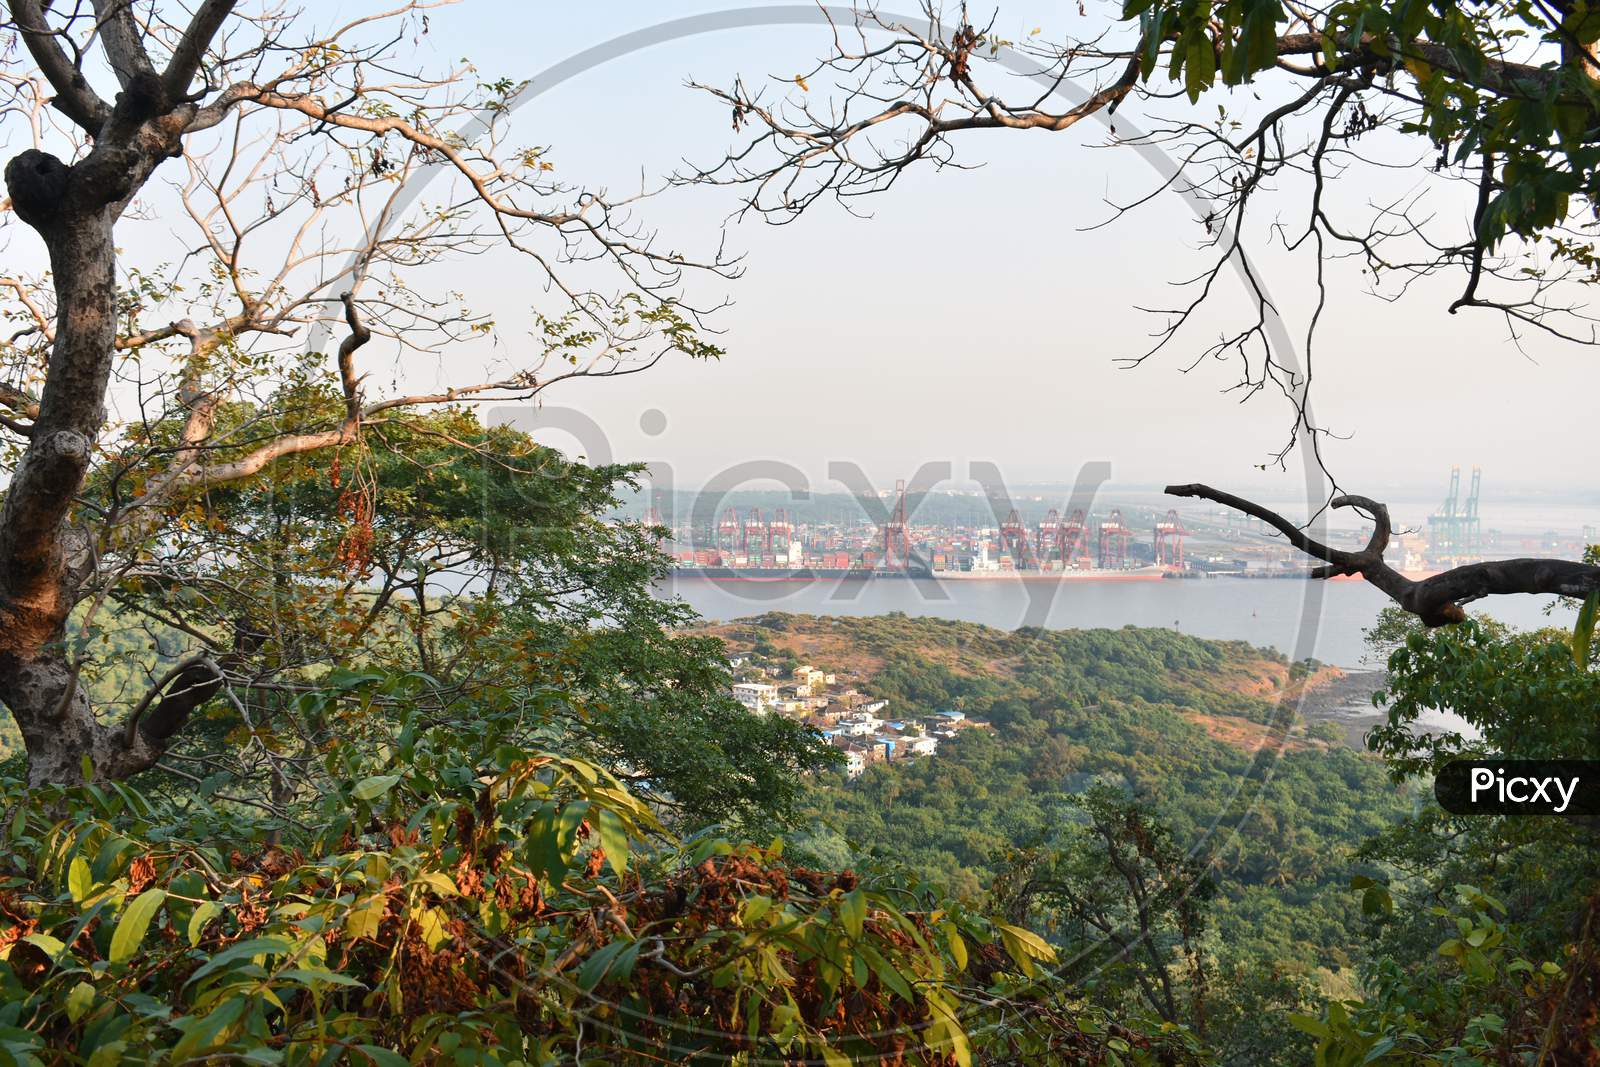 Beautiful Mumbai Port Captured From The Top With Colourful Trees In The Foreground.